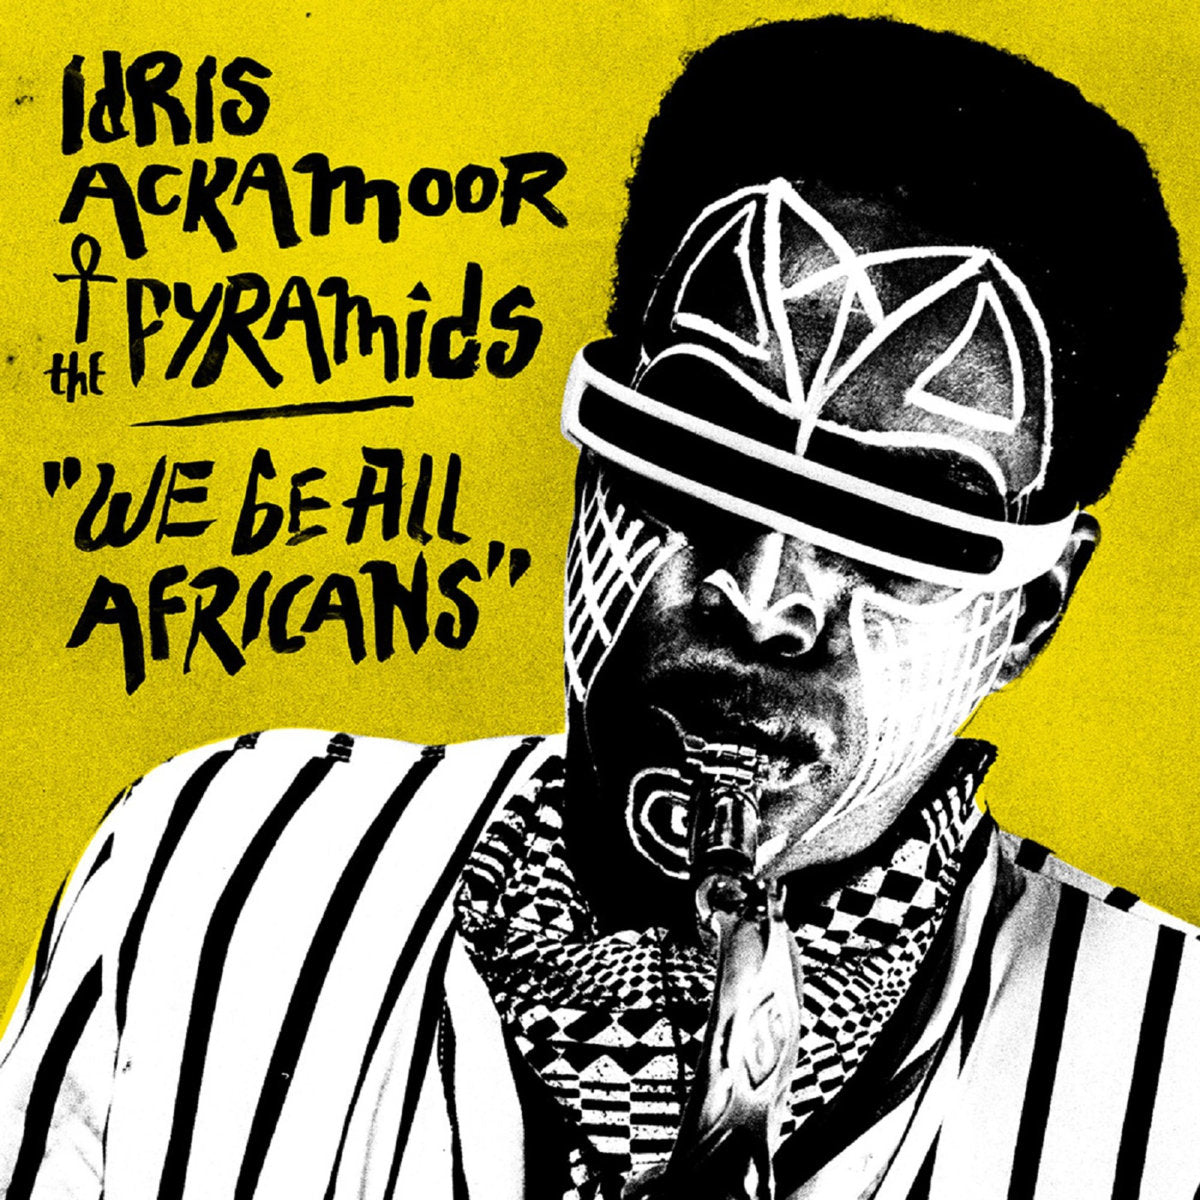 Idris Ackamoor & The Pyramids 'We Be All Africans'